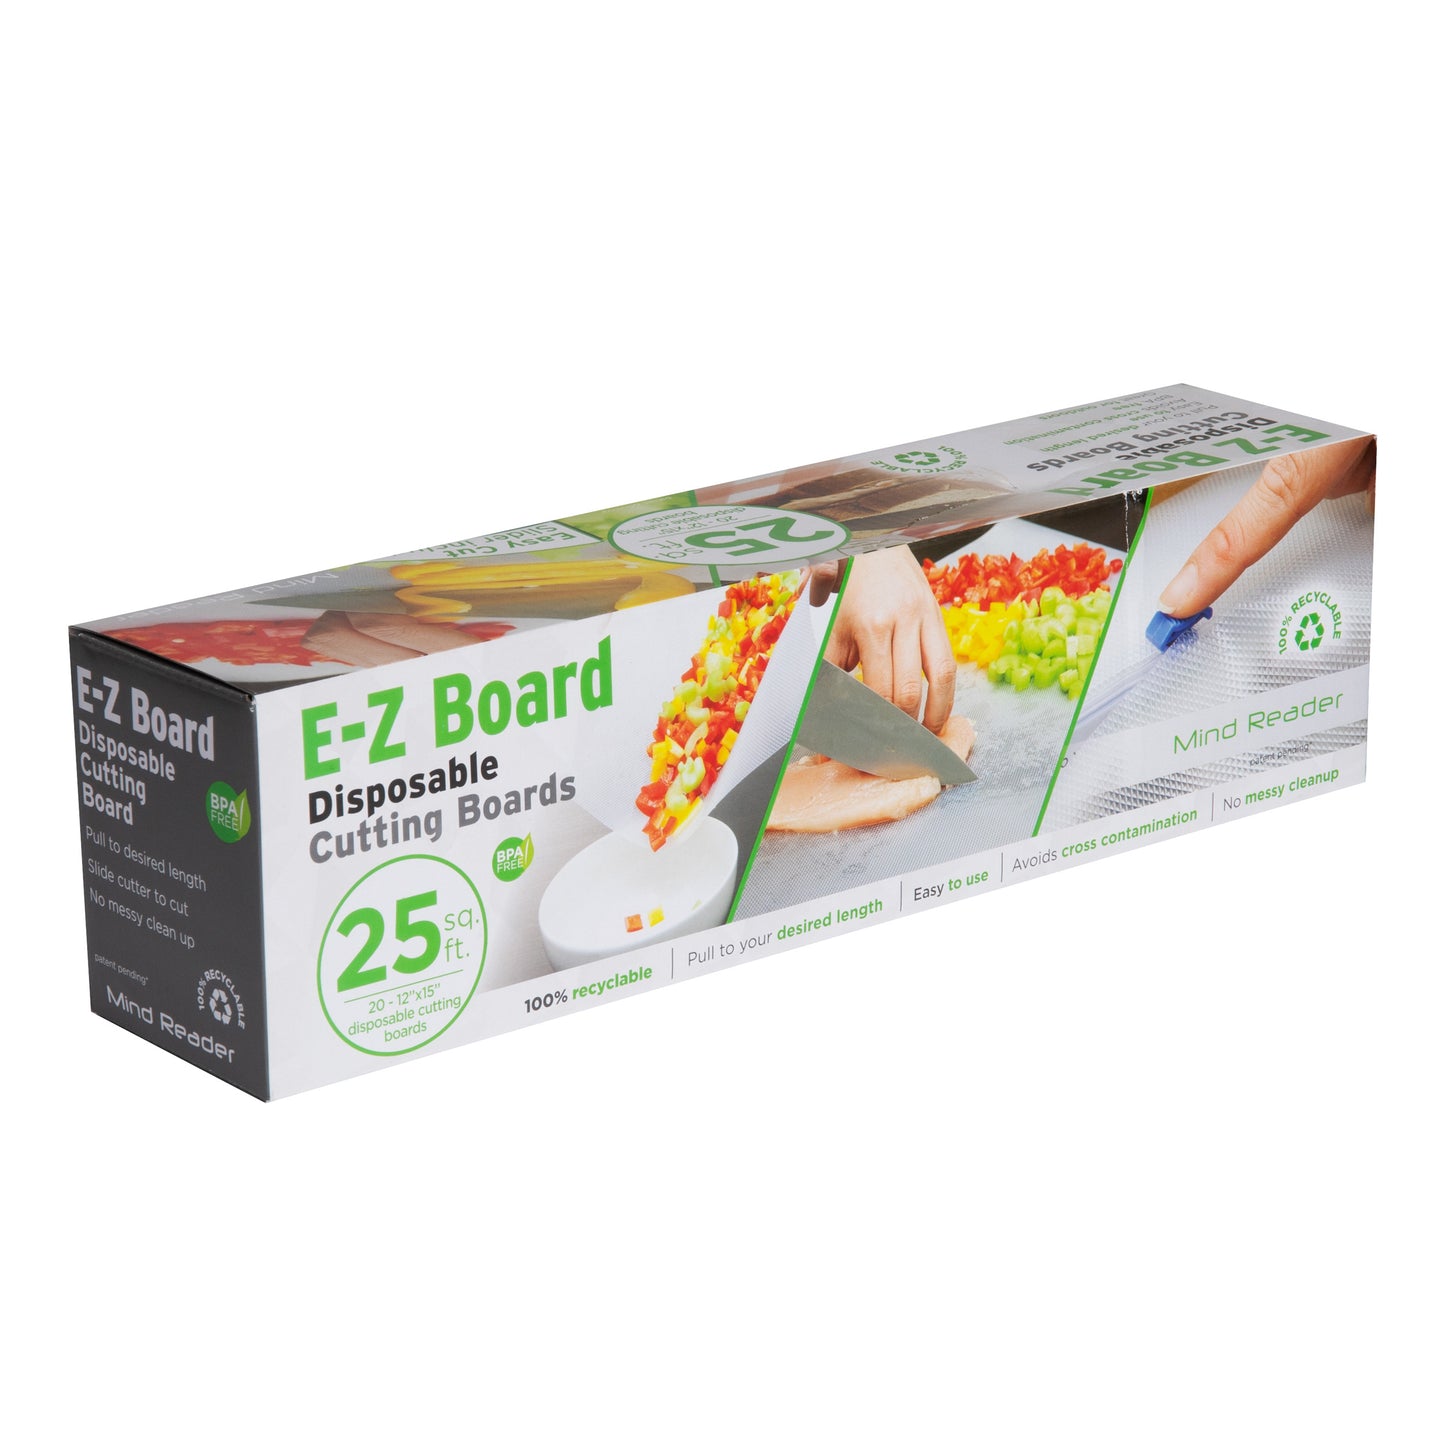 Mind Reader E-Z Board Disposable Plastic Cutting Board, 25 Square Feet, Easy Clean-Up and Convenient Use, Ideal for Camping, Hunting, Boating, and For People With Food Allergies, Clear